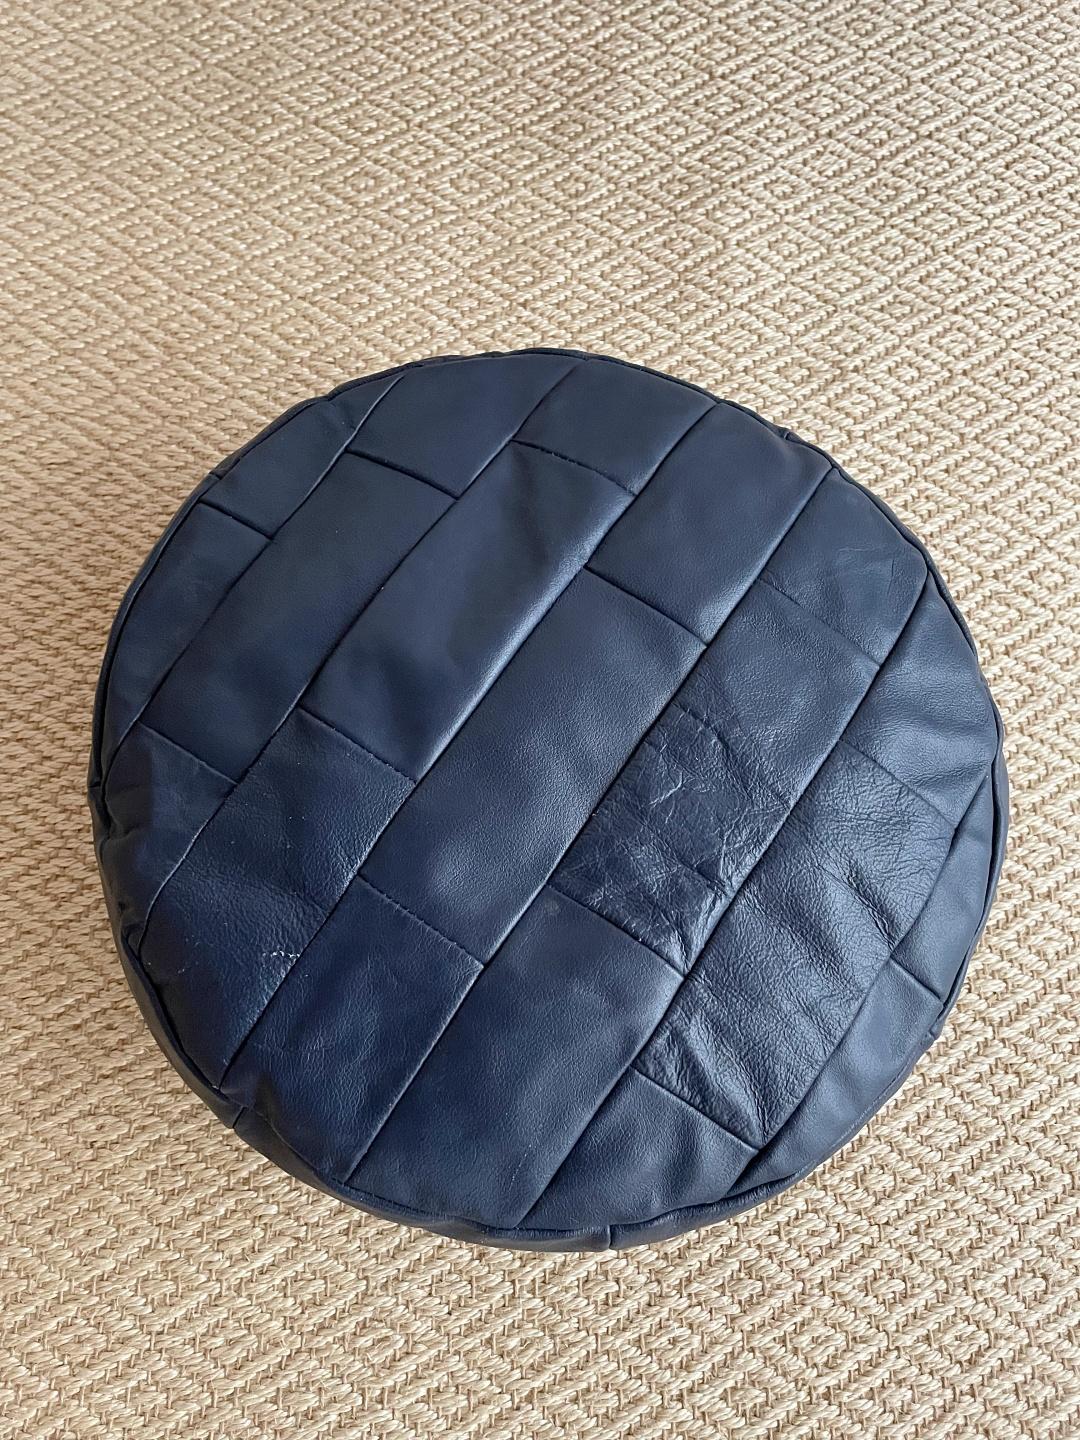 Hand-Crafted De Sede DS-80 Blue Patchwork Leather Pouf, Ottoman, DeSede Switzerland For Sale